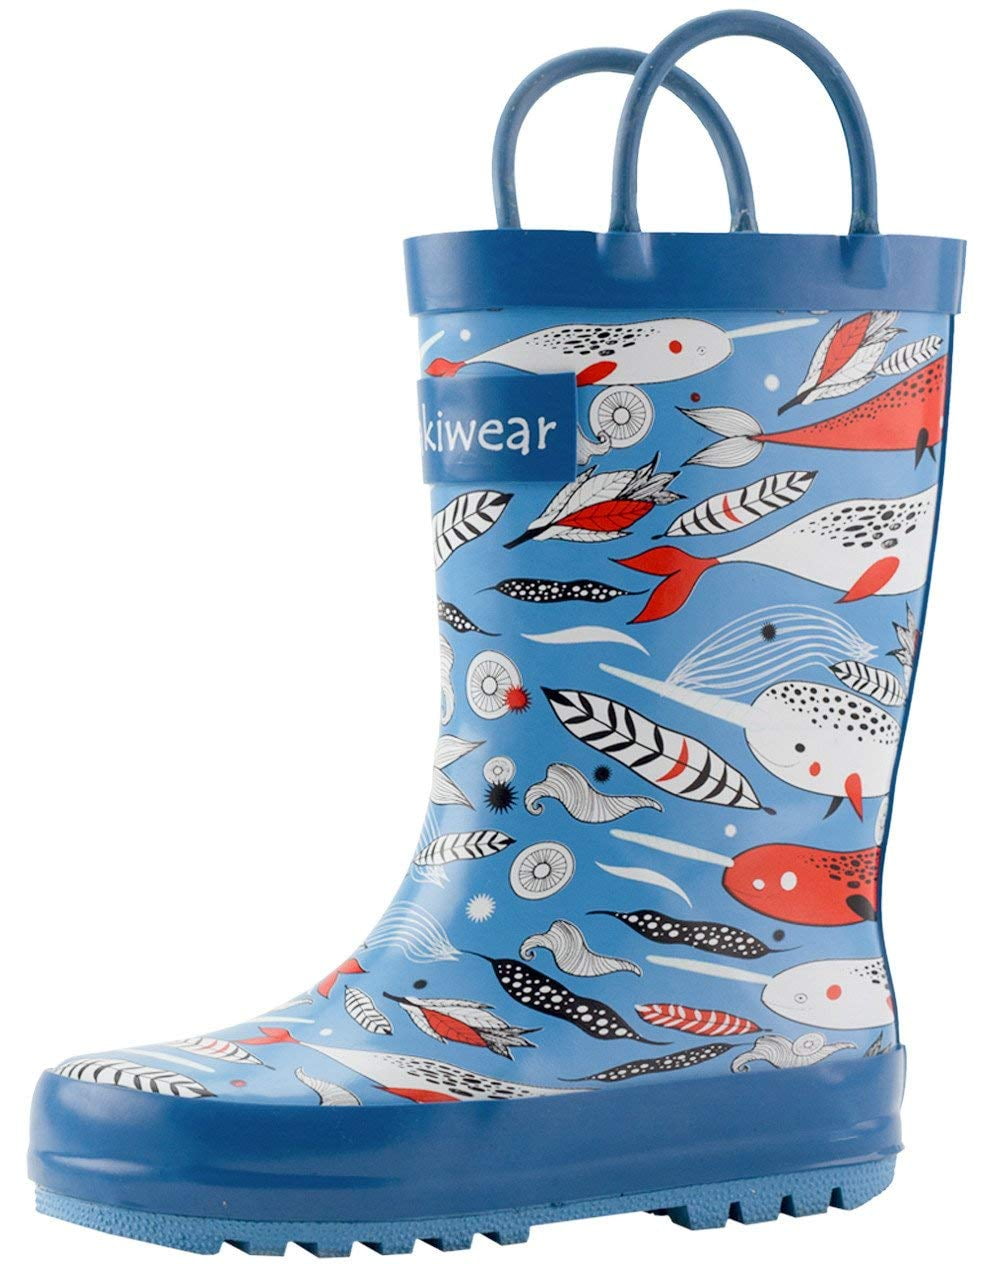 Blue Dino 7T US Toddler OAKI Kids Rubber Rain Boots with Easy-On Handles